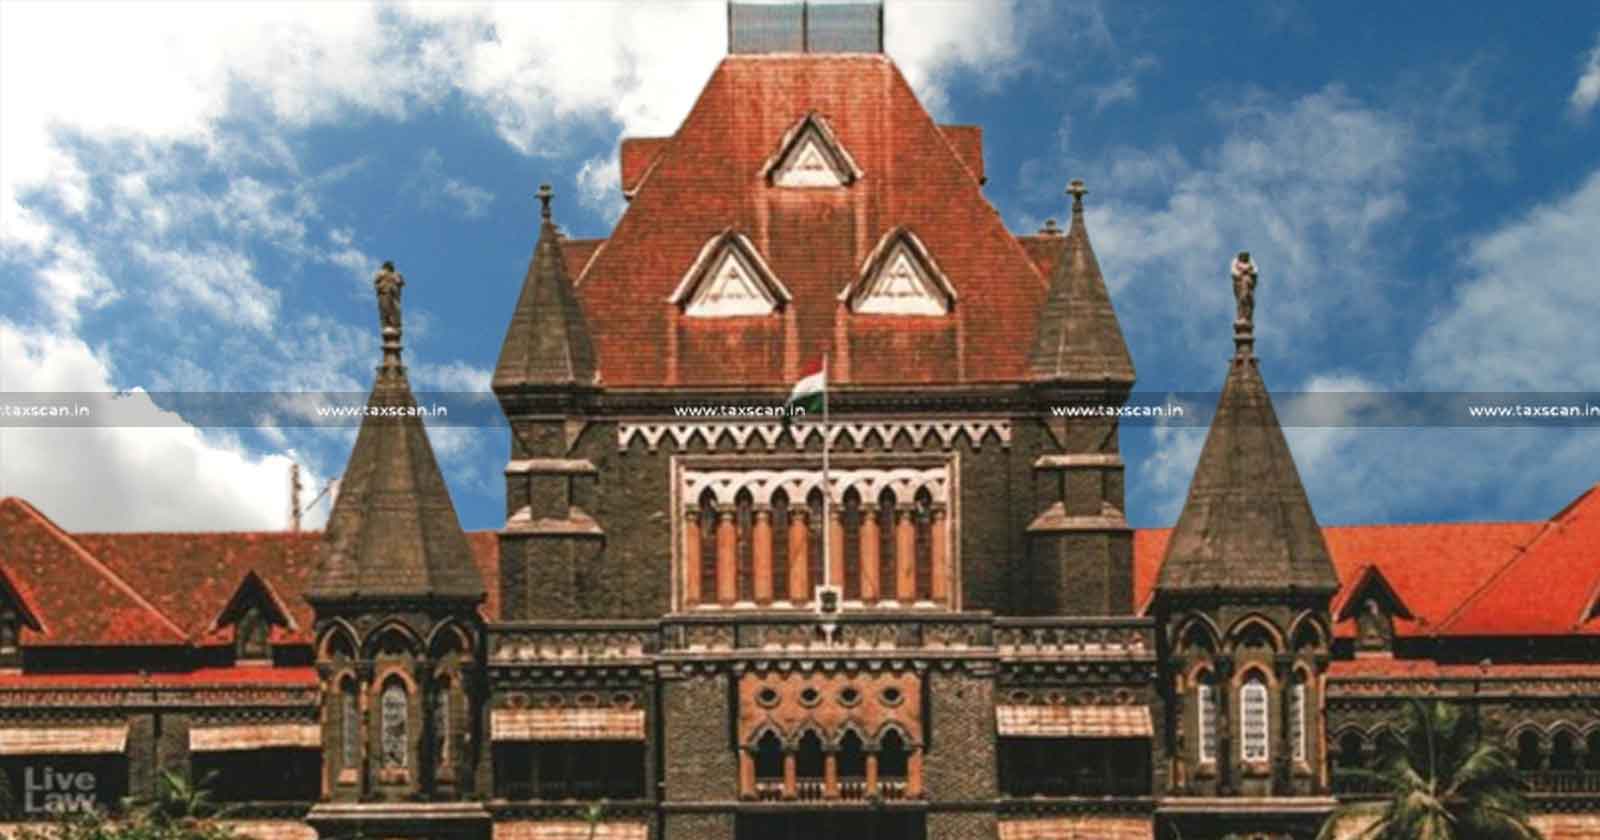 Write-off of Bad Debt - Debt - Asset - Income Tax Act - Assessment - Bombay HC - taxscan